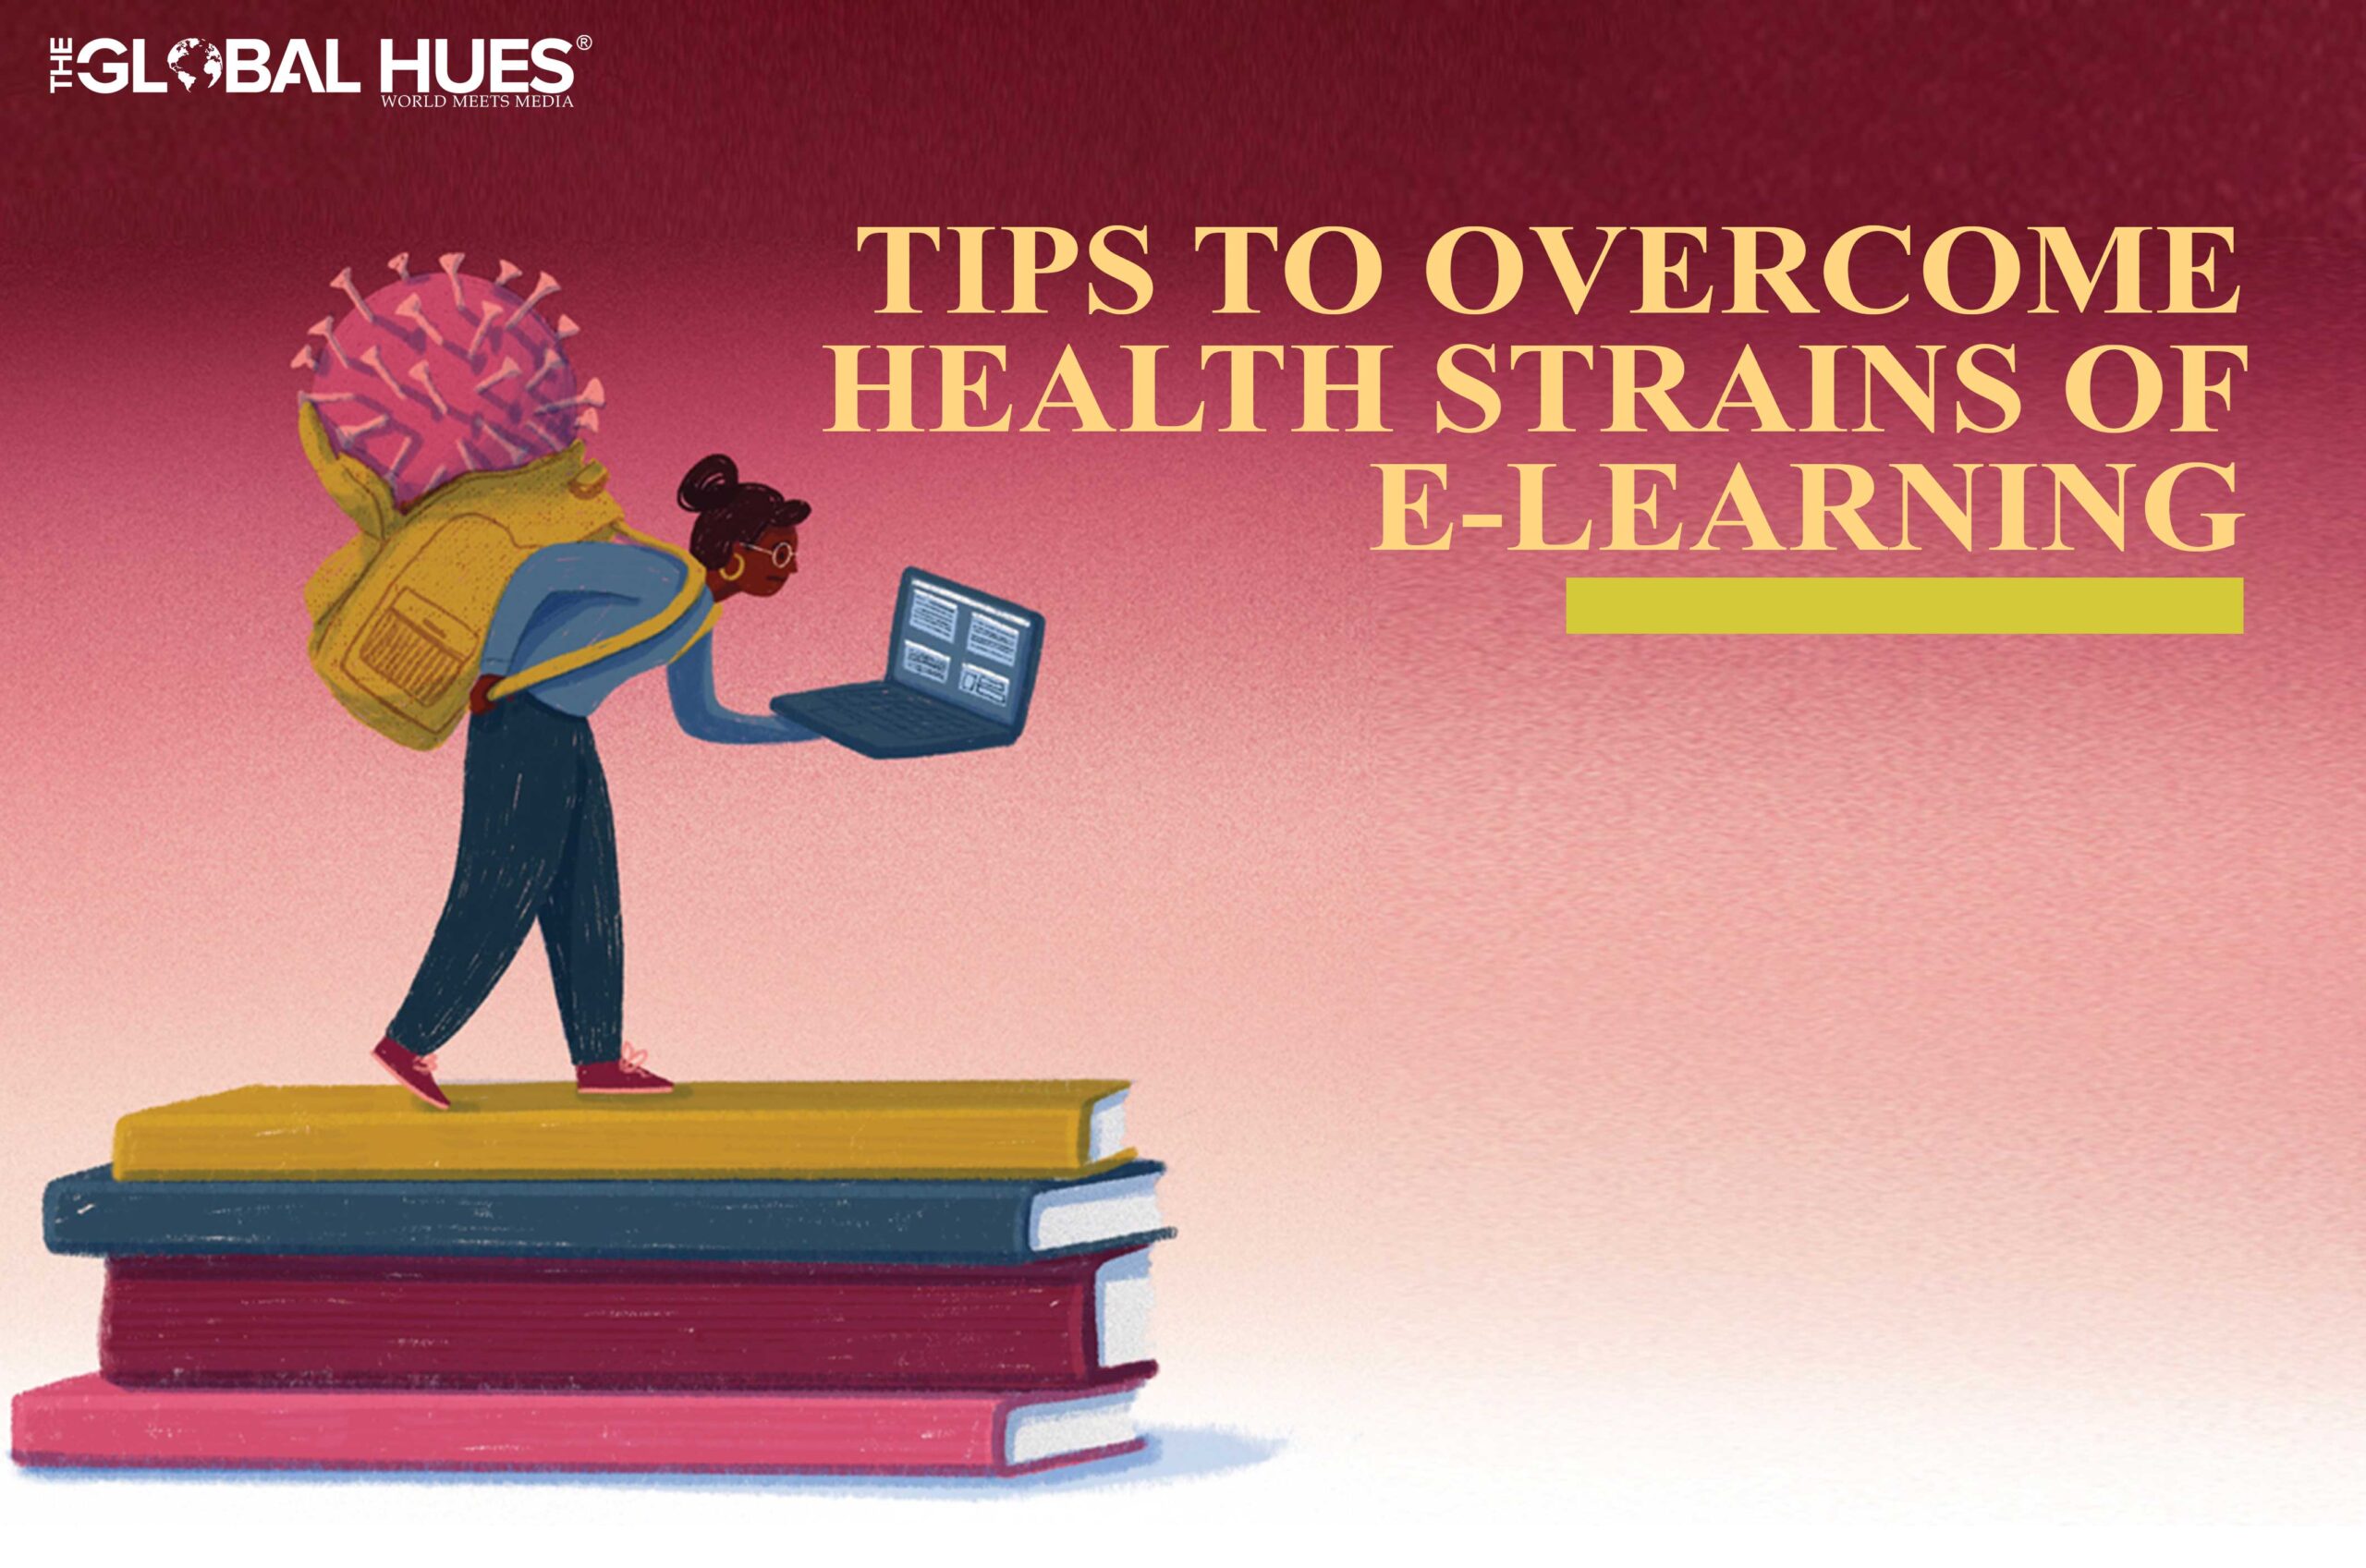 Tips-to-overcome-health-strains-of-e-learning